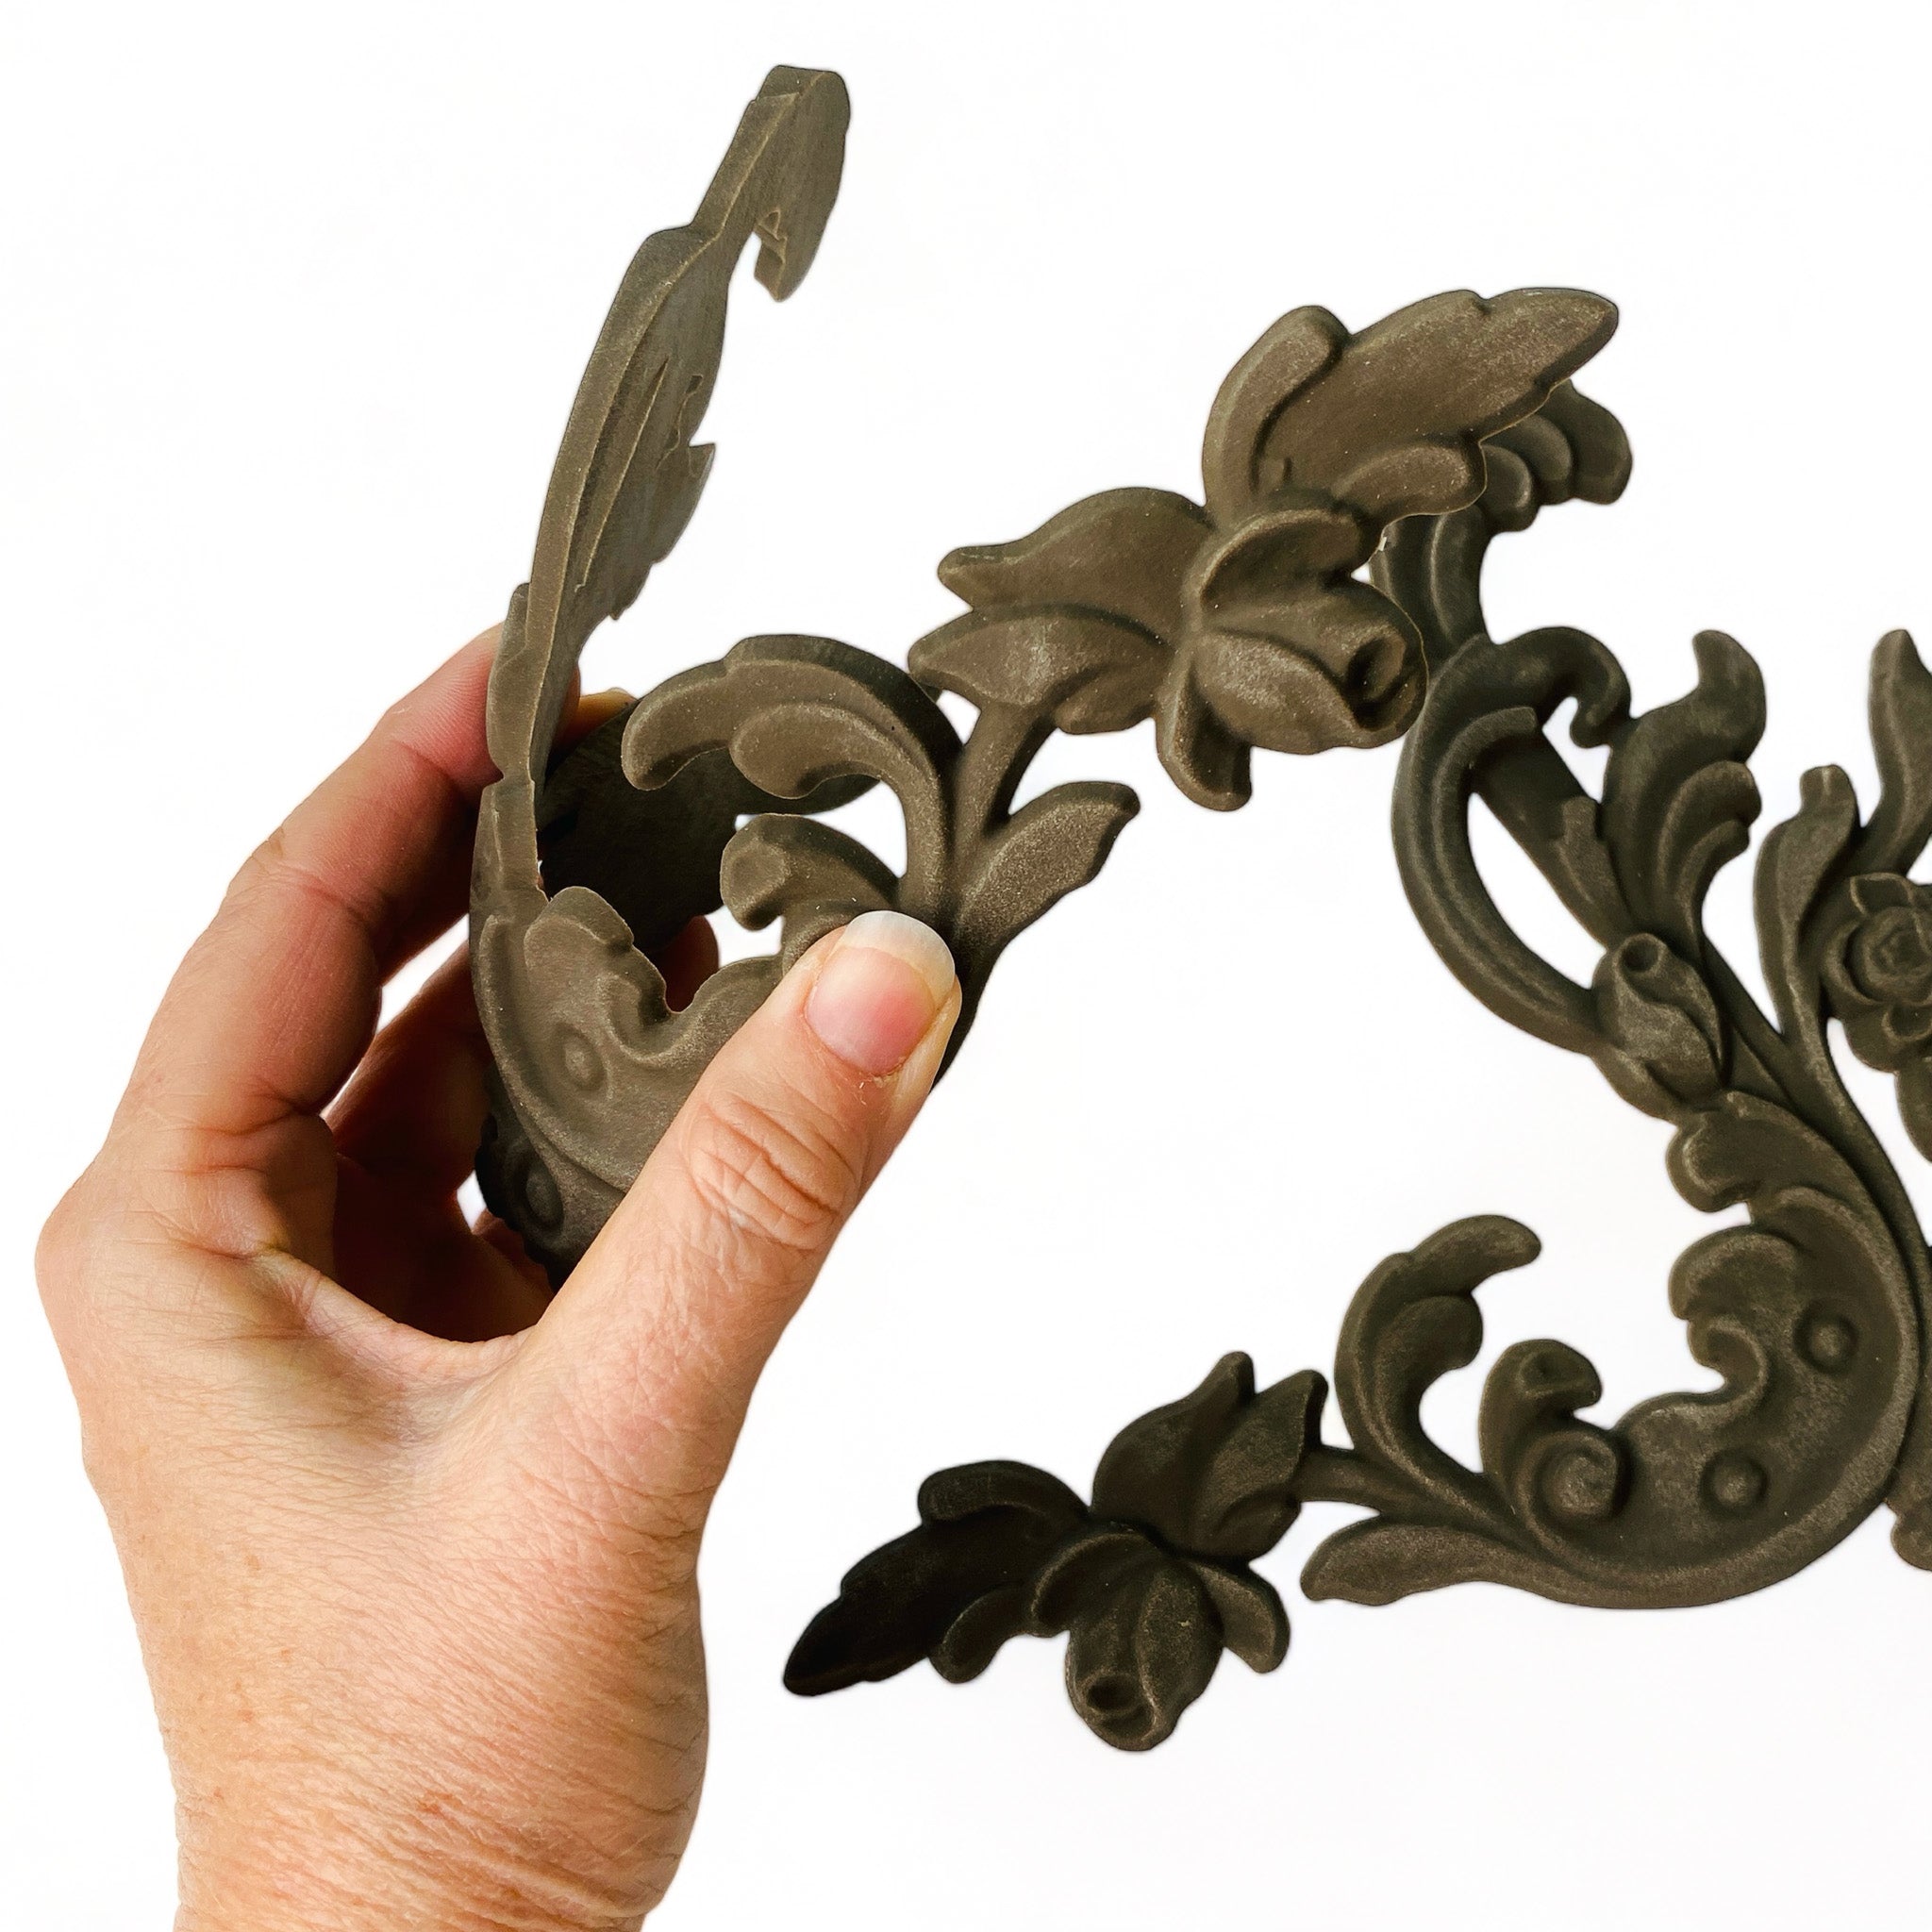 A hand is shown holding and flexing 1 of 2 bendable furniture appliques that feature corner flourishes, adorned with delicate leaves and flowers against a white background.